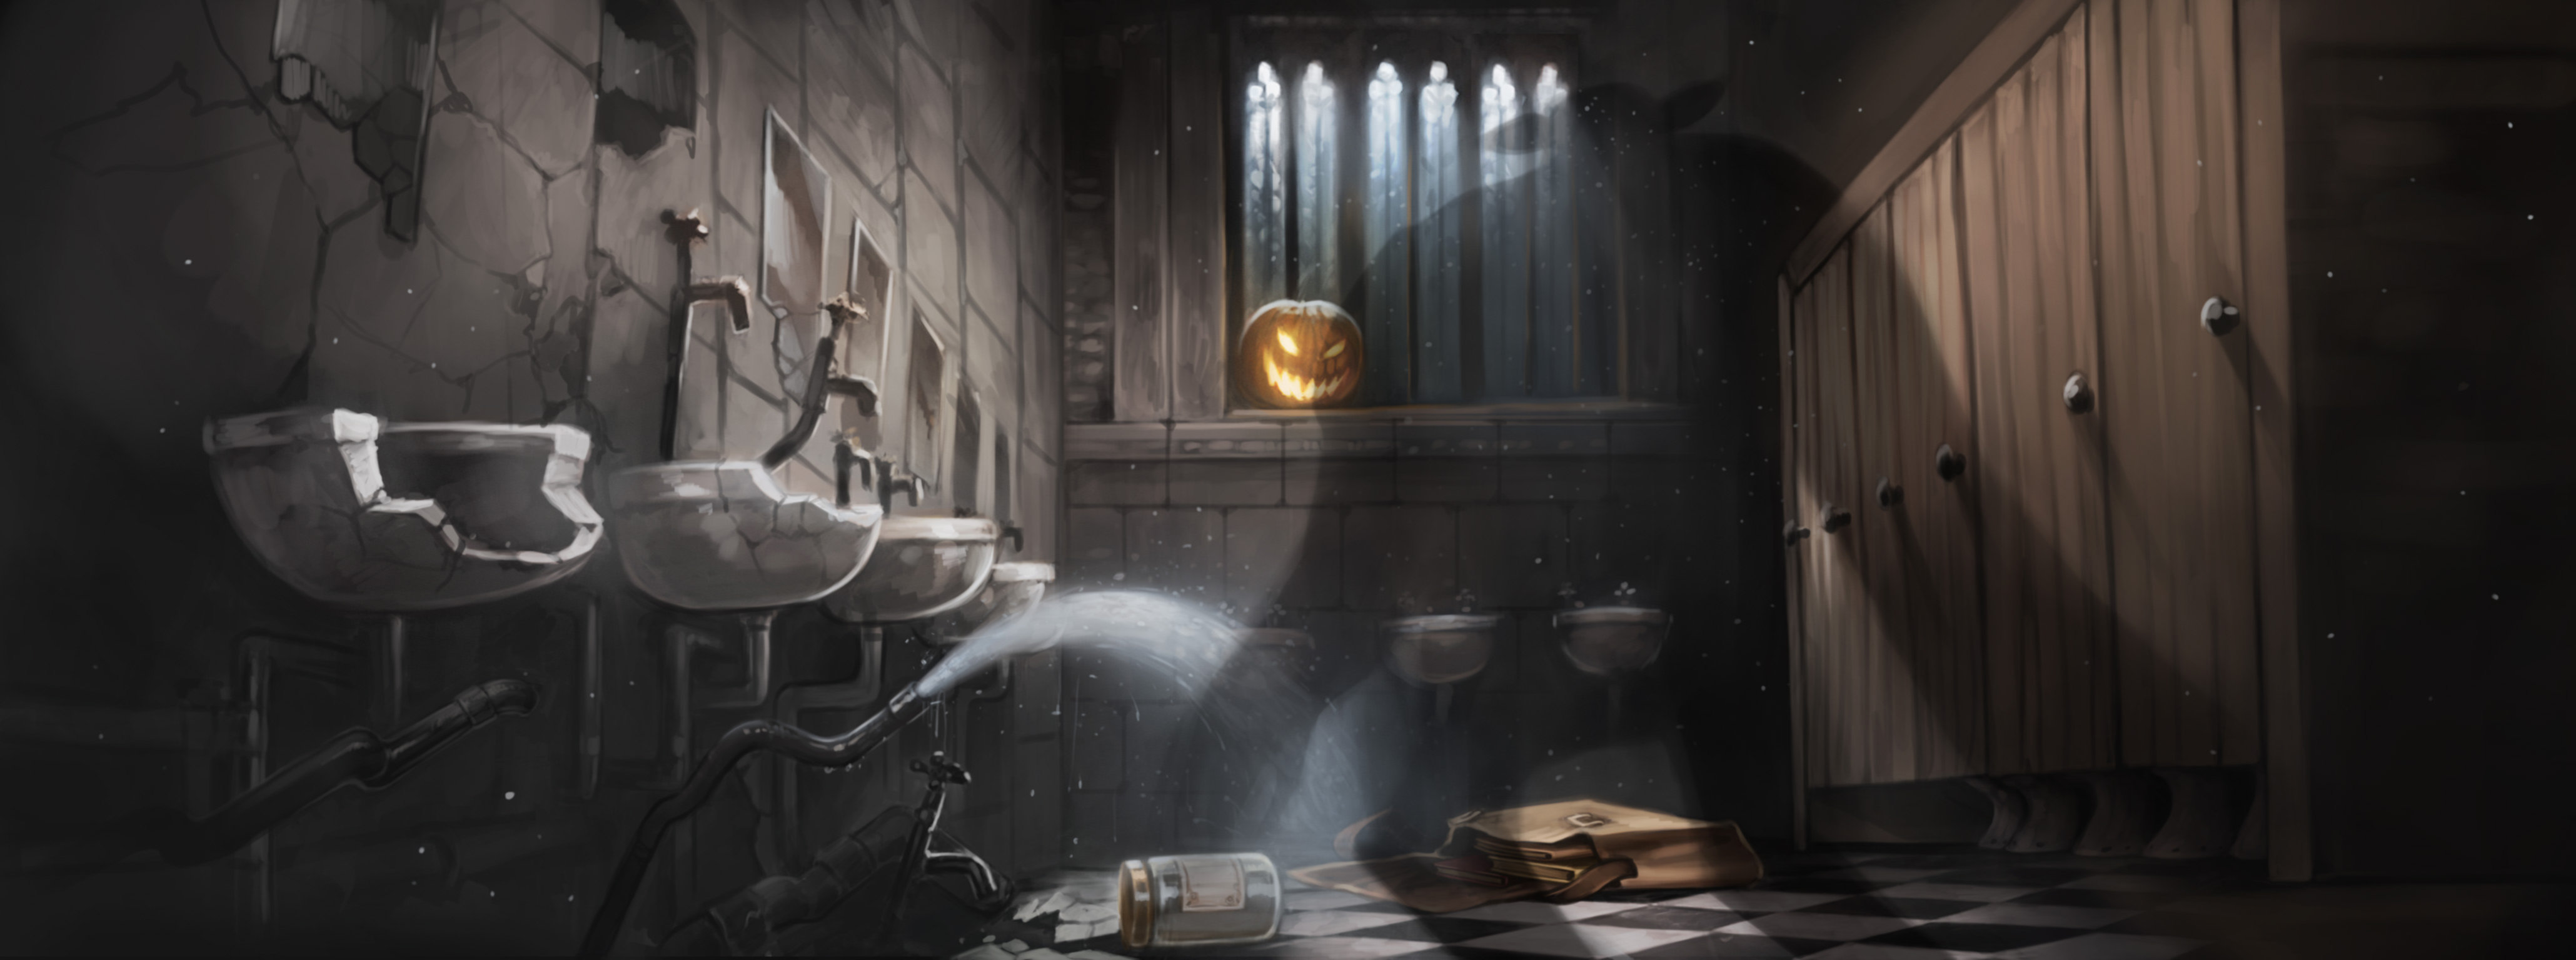 The 5 strangest things ever in a bathroom | Wizarding World